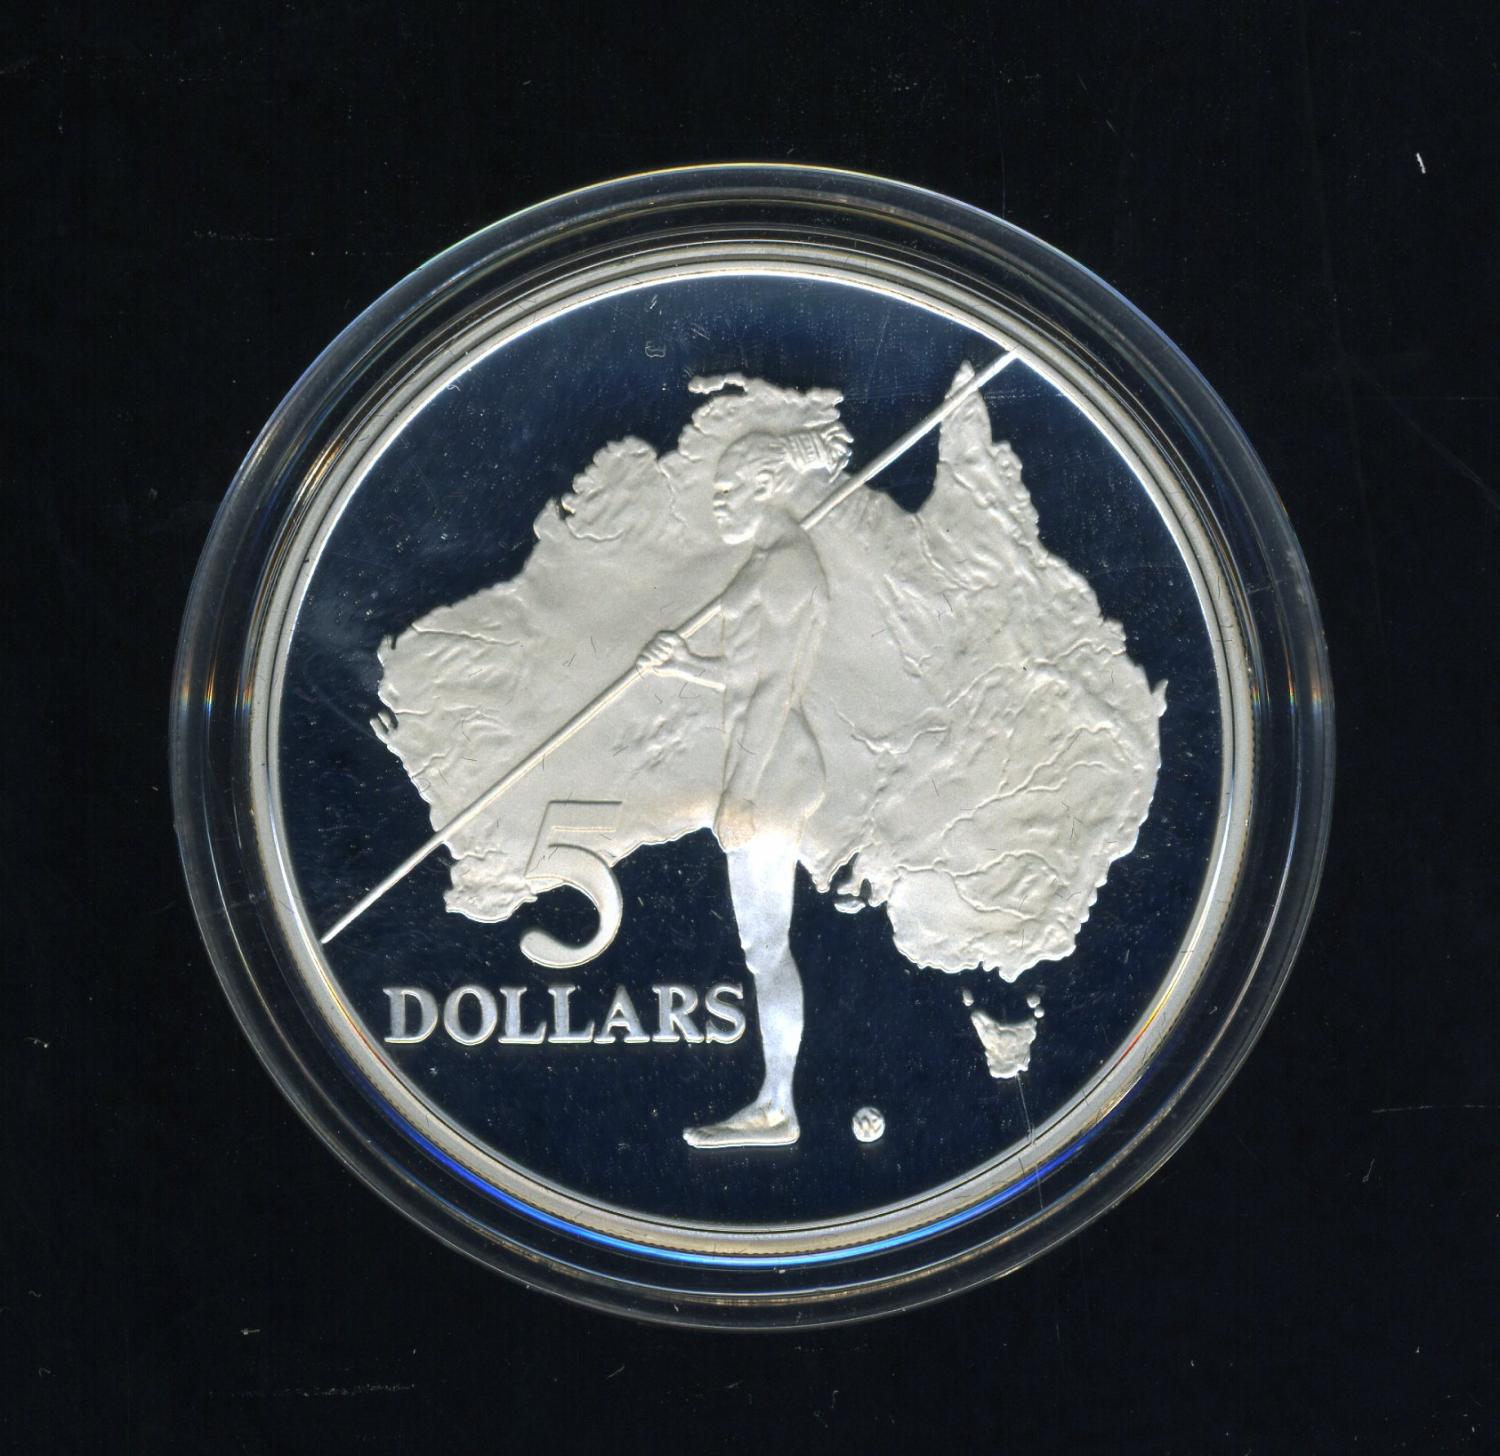 Thumbnail for 1993 Australian $5 Silver Coin from Masterpieces in Silver Set - Aboriginal.  The Coin is Sterling Silver and contains over 1oz of Pure Silver.